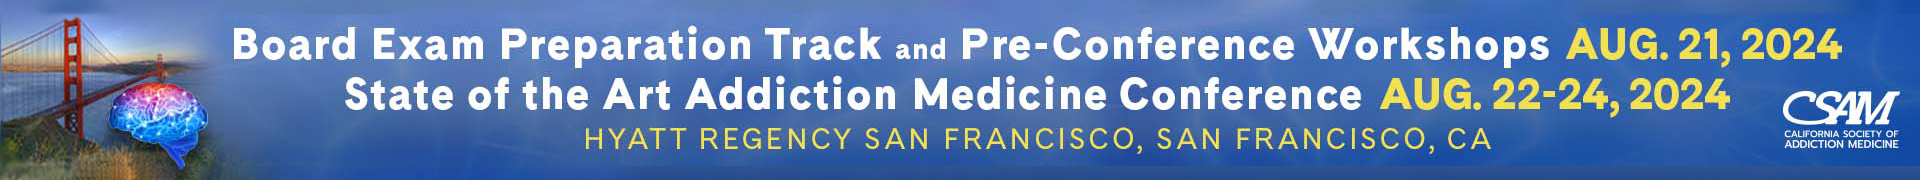 2024 State of the Art Addiction Medicine and Board Exam Preparation Track Event Banner